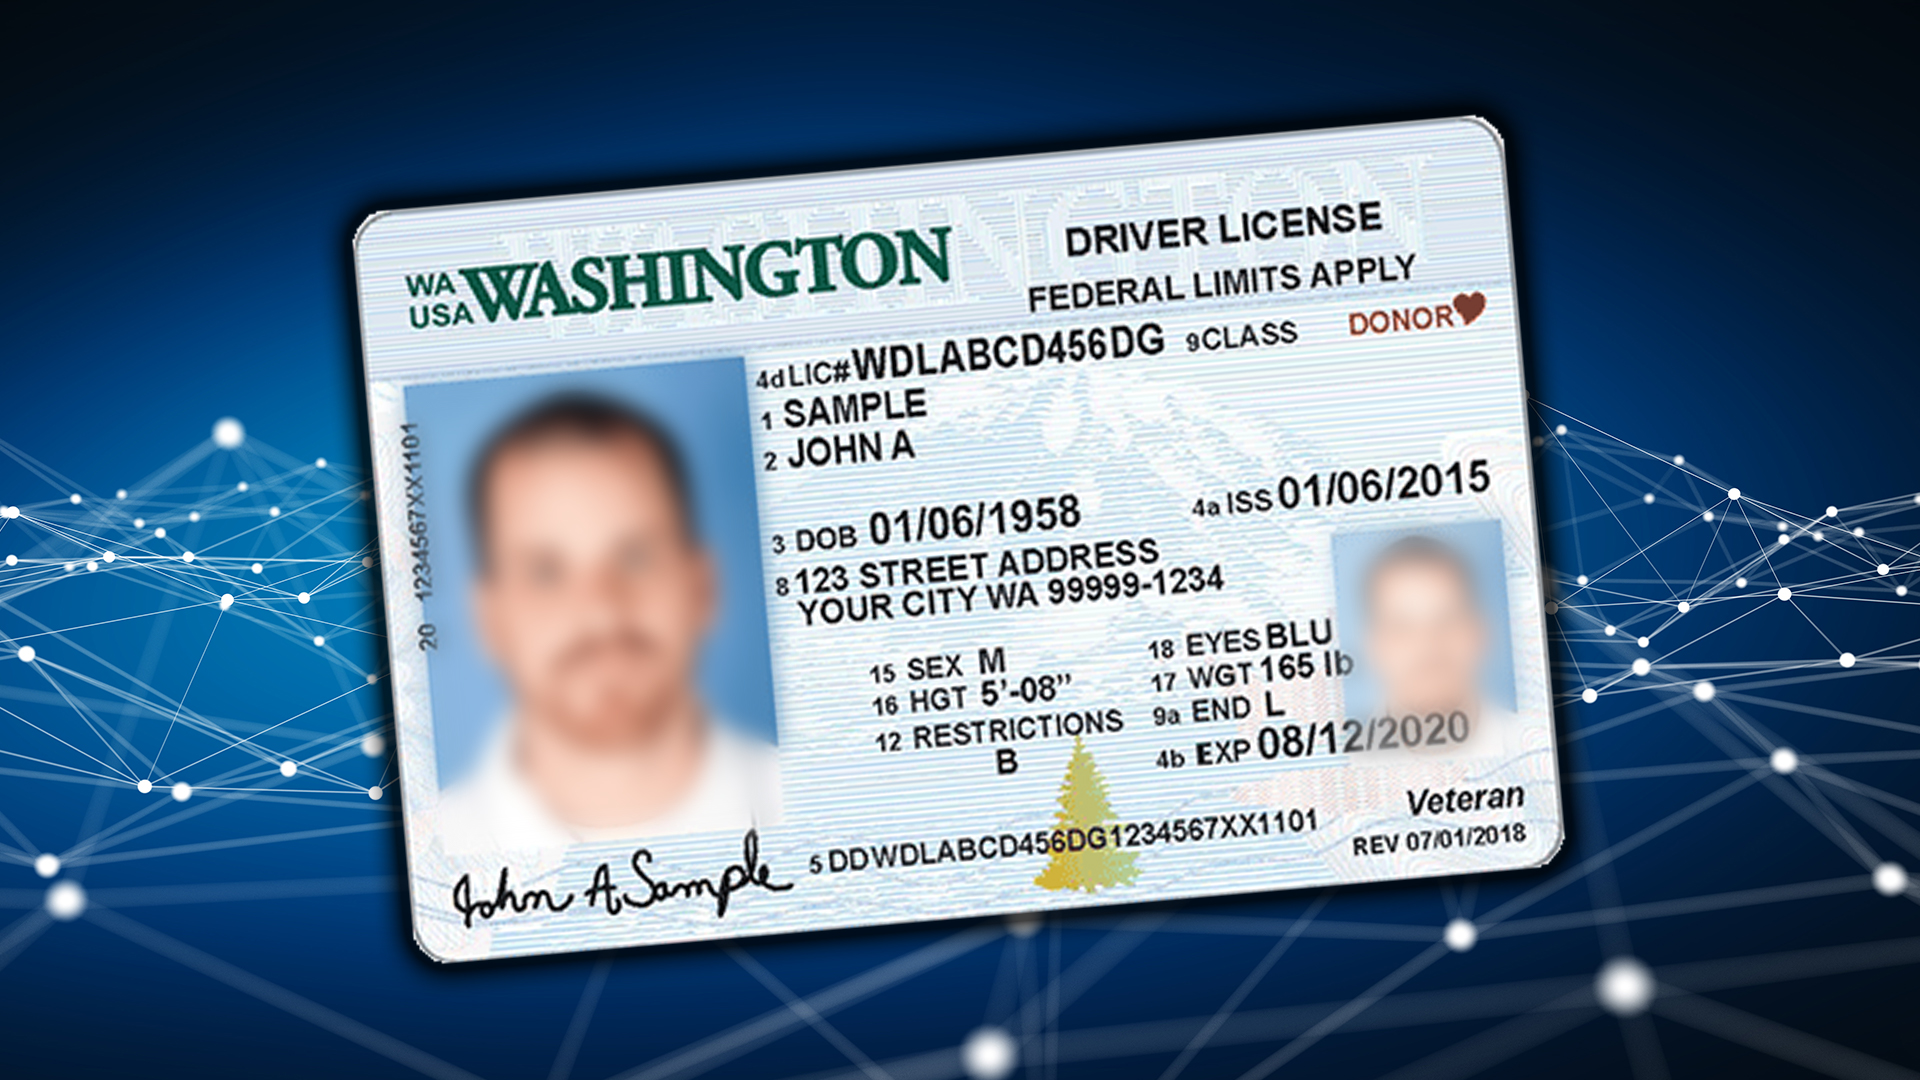 Vermont Scannable Fake Id Front And Back